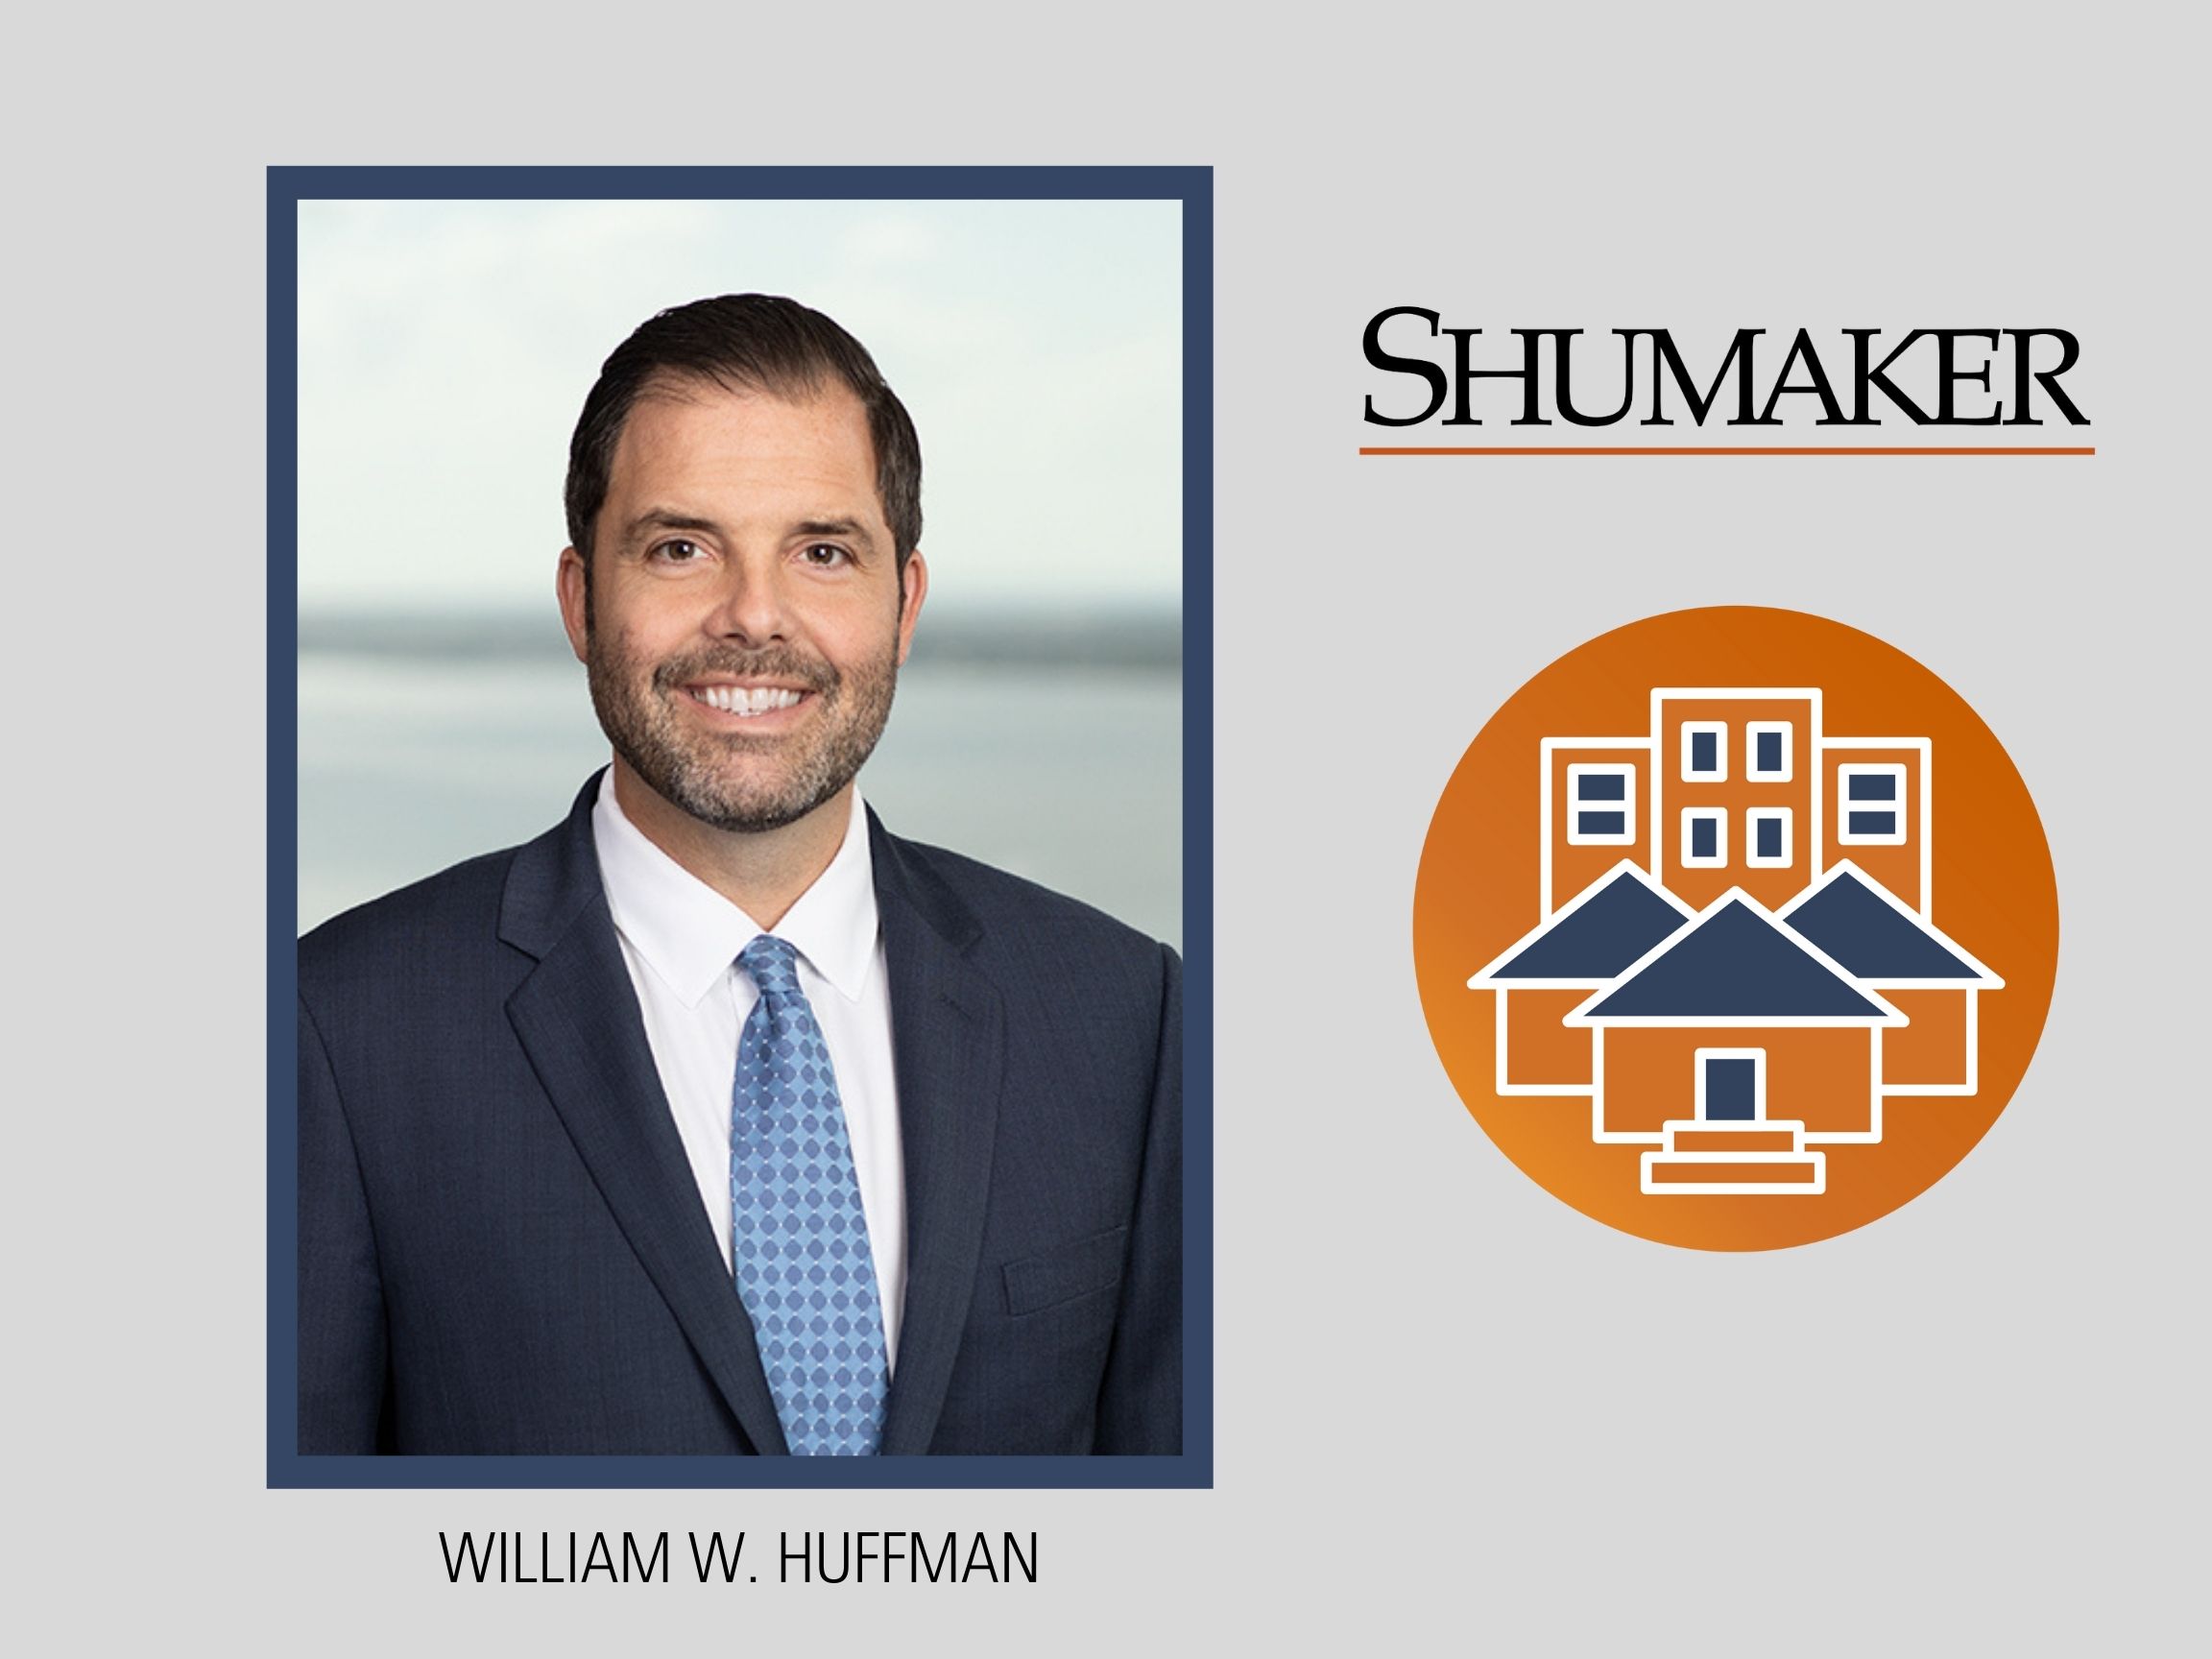 Shumaker's Community Associations Business Sector Continues to Expand with Addition of William Huffman